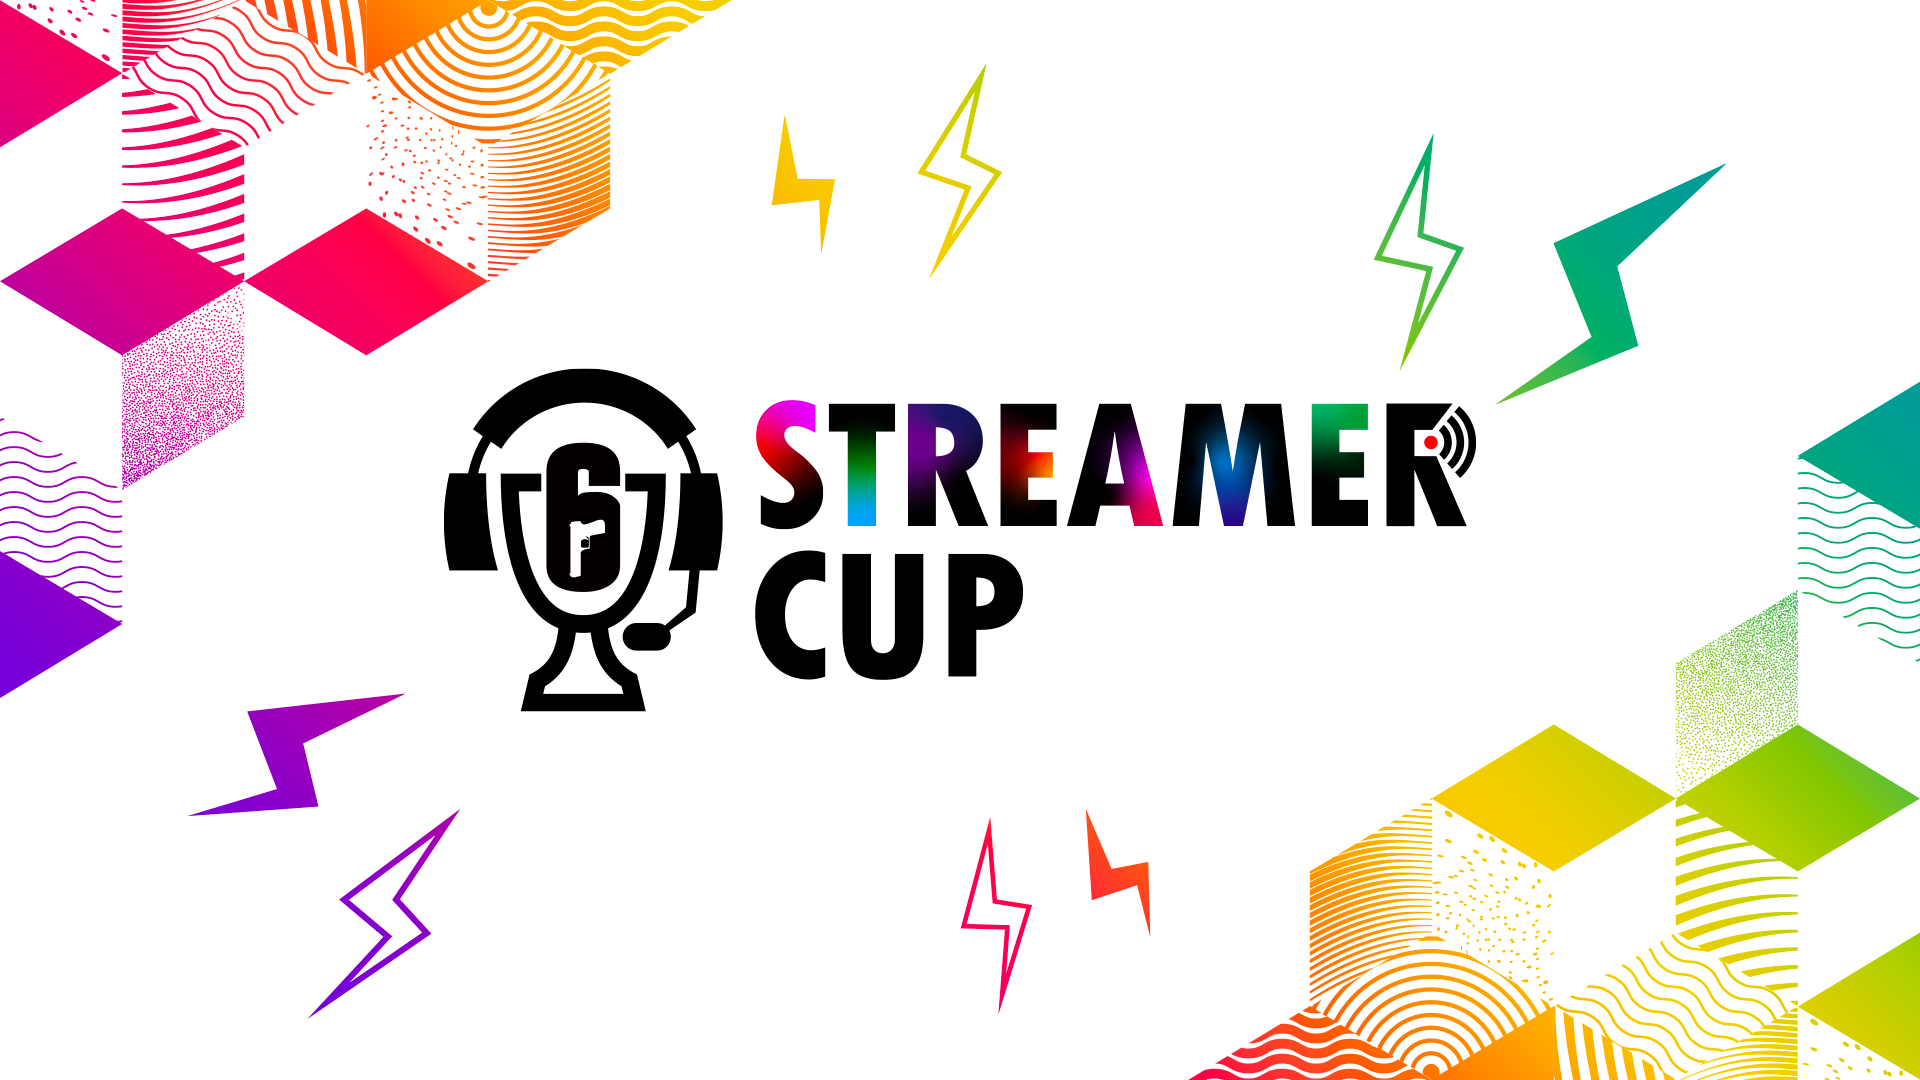 Streamcup. Major Cup logo. Stream cup